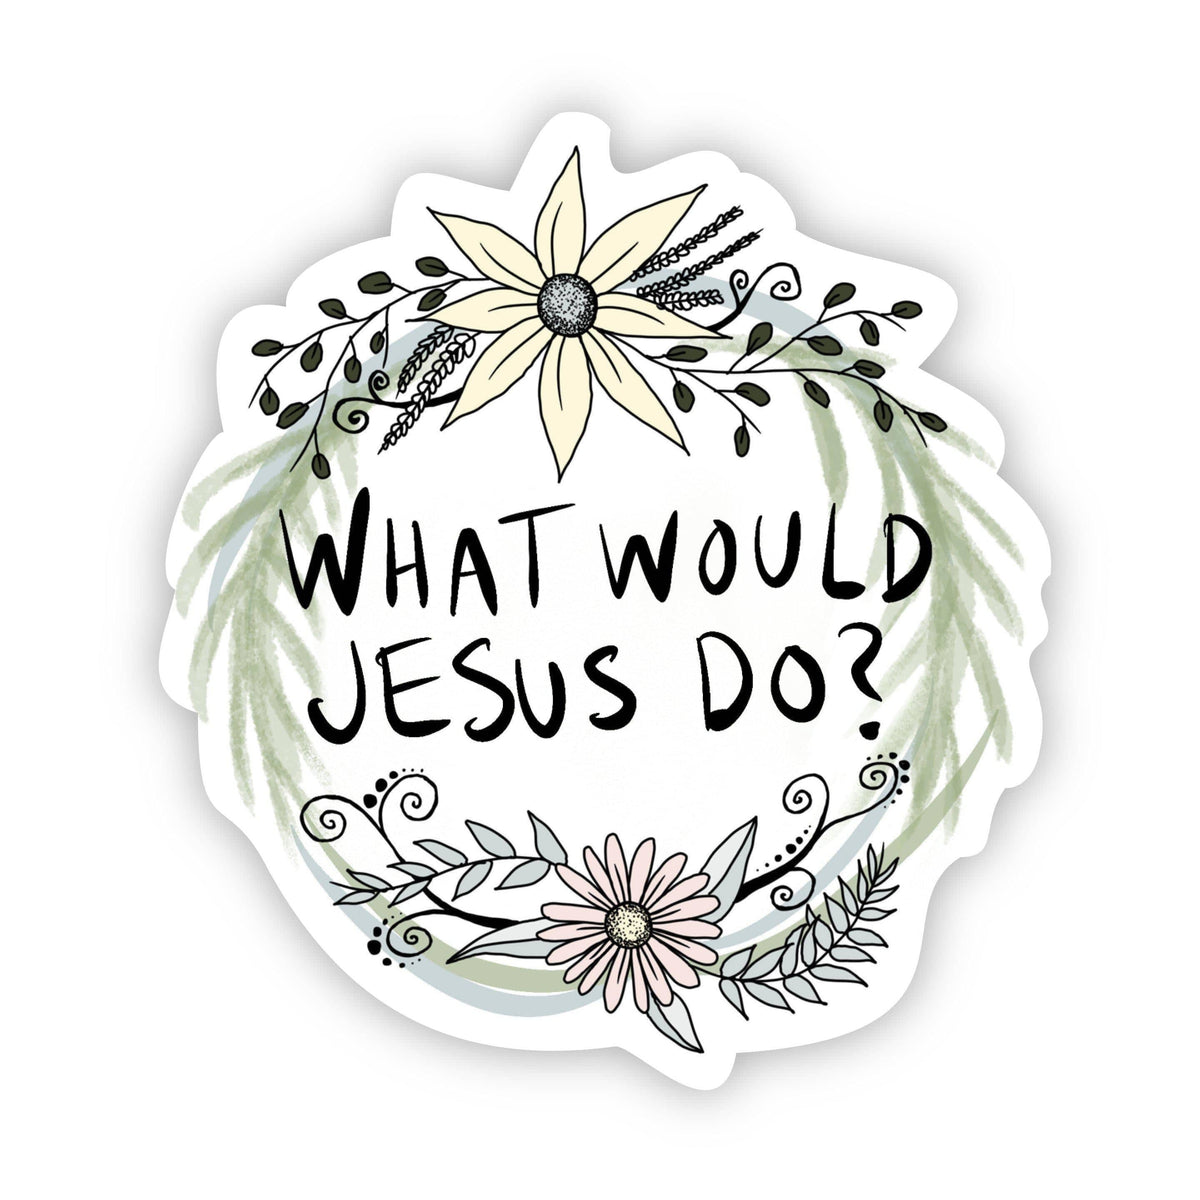 I can do all things through Christ who strengthens me - floral faith sticker